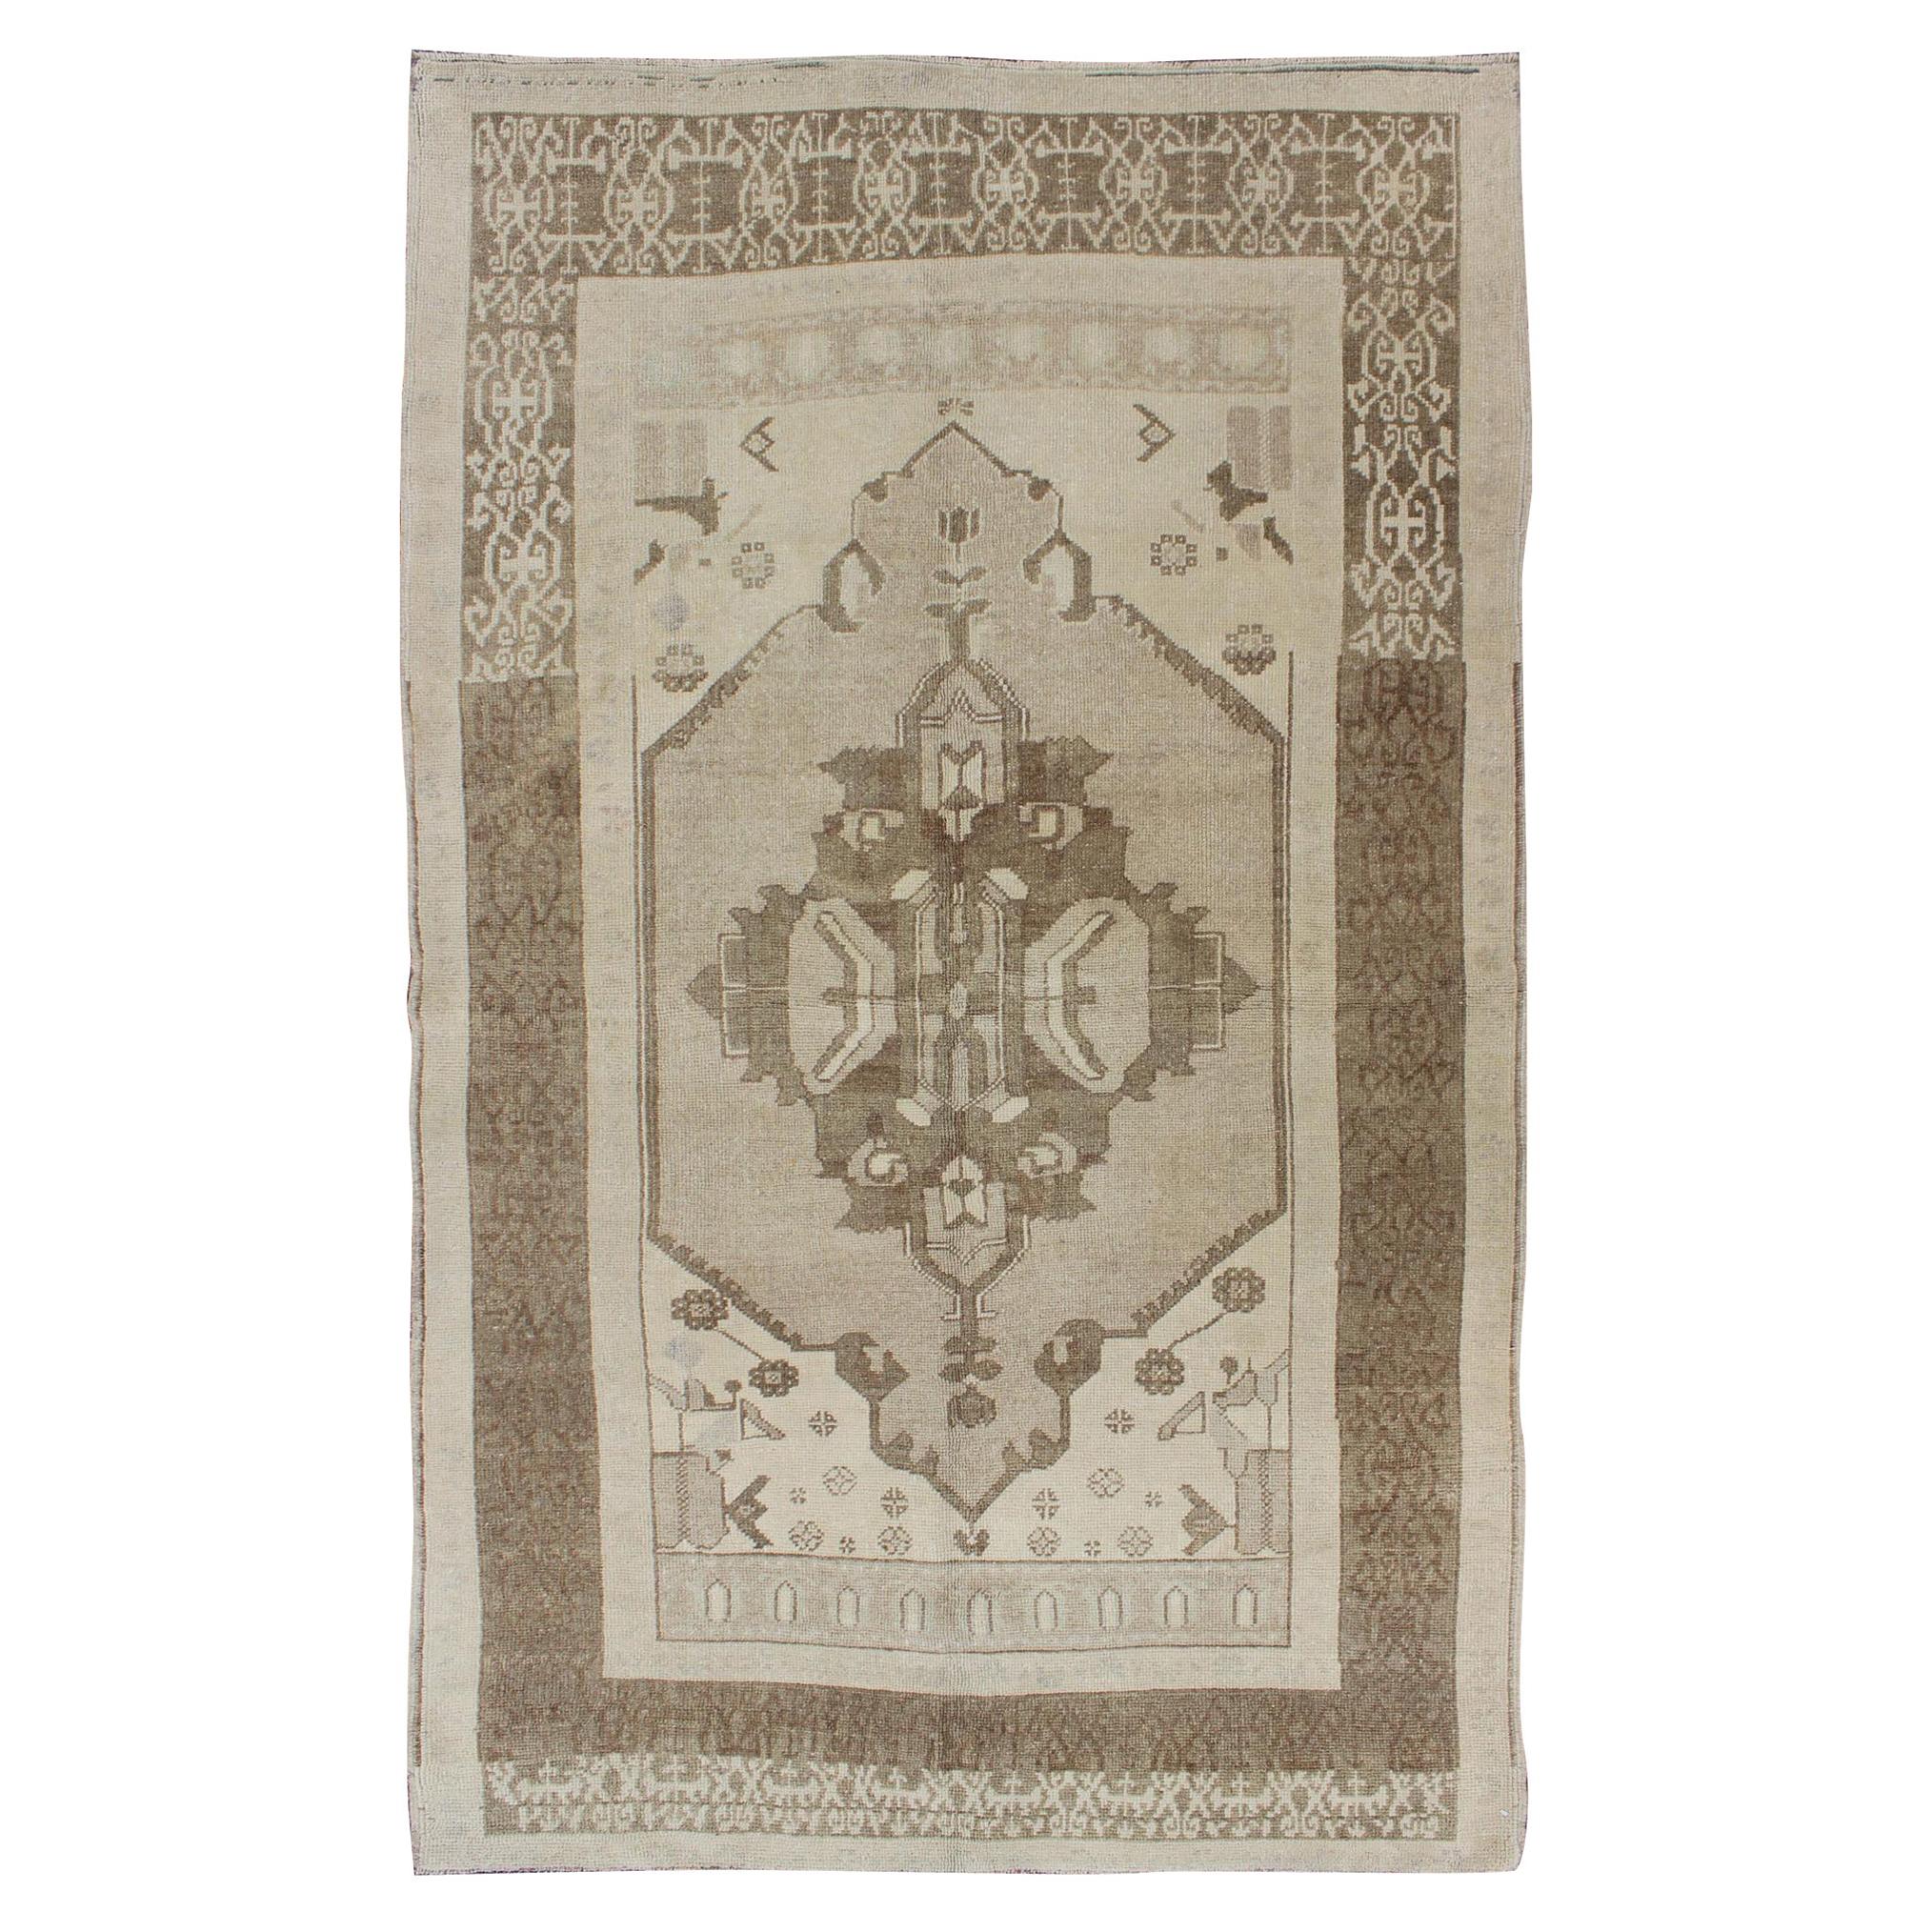 Vintage Turkish Oushak Rug in Taupe, Brown and Earth Colors